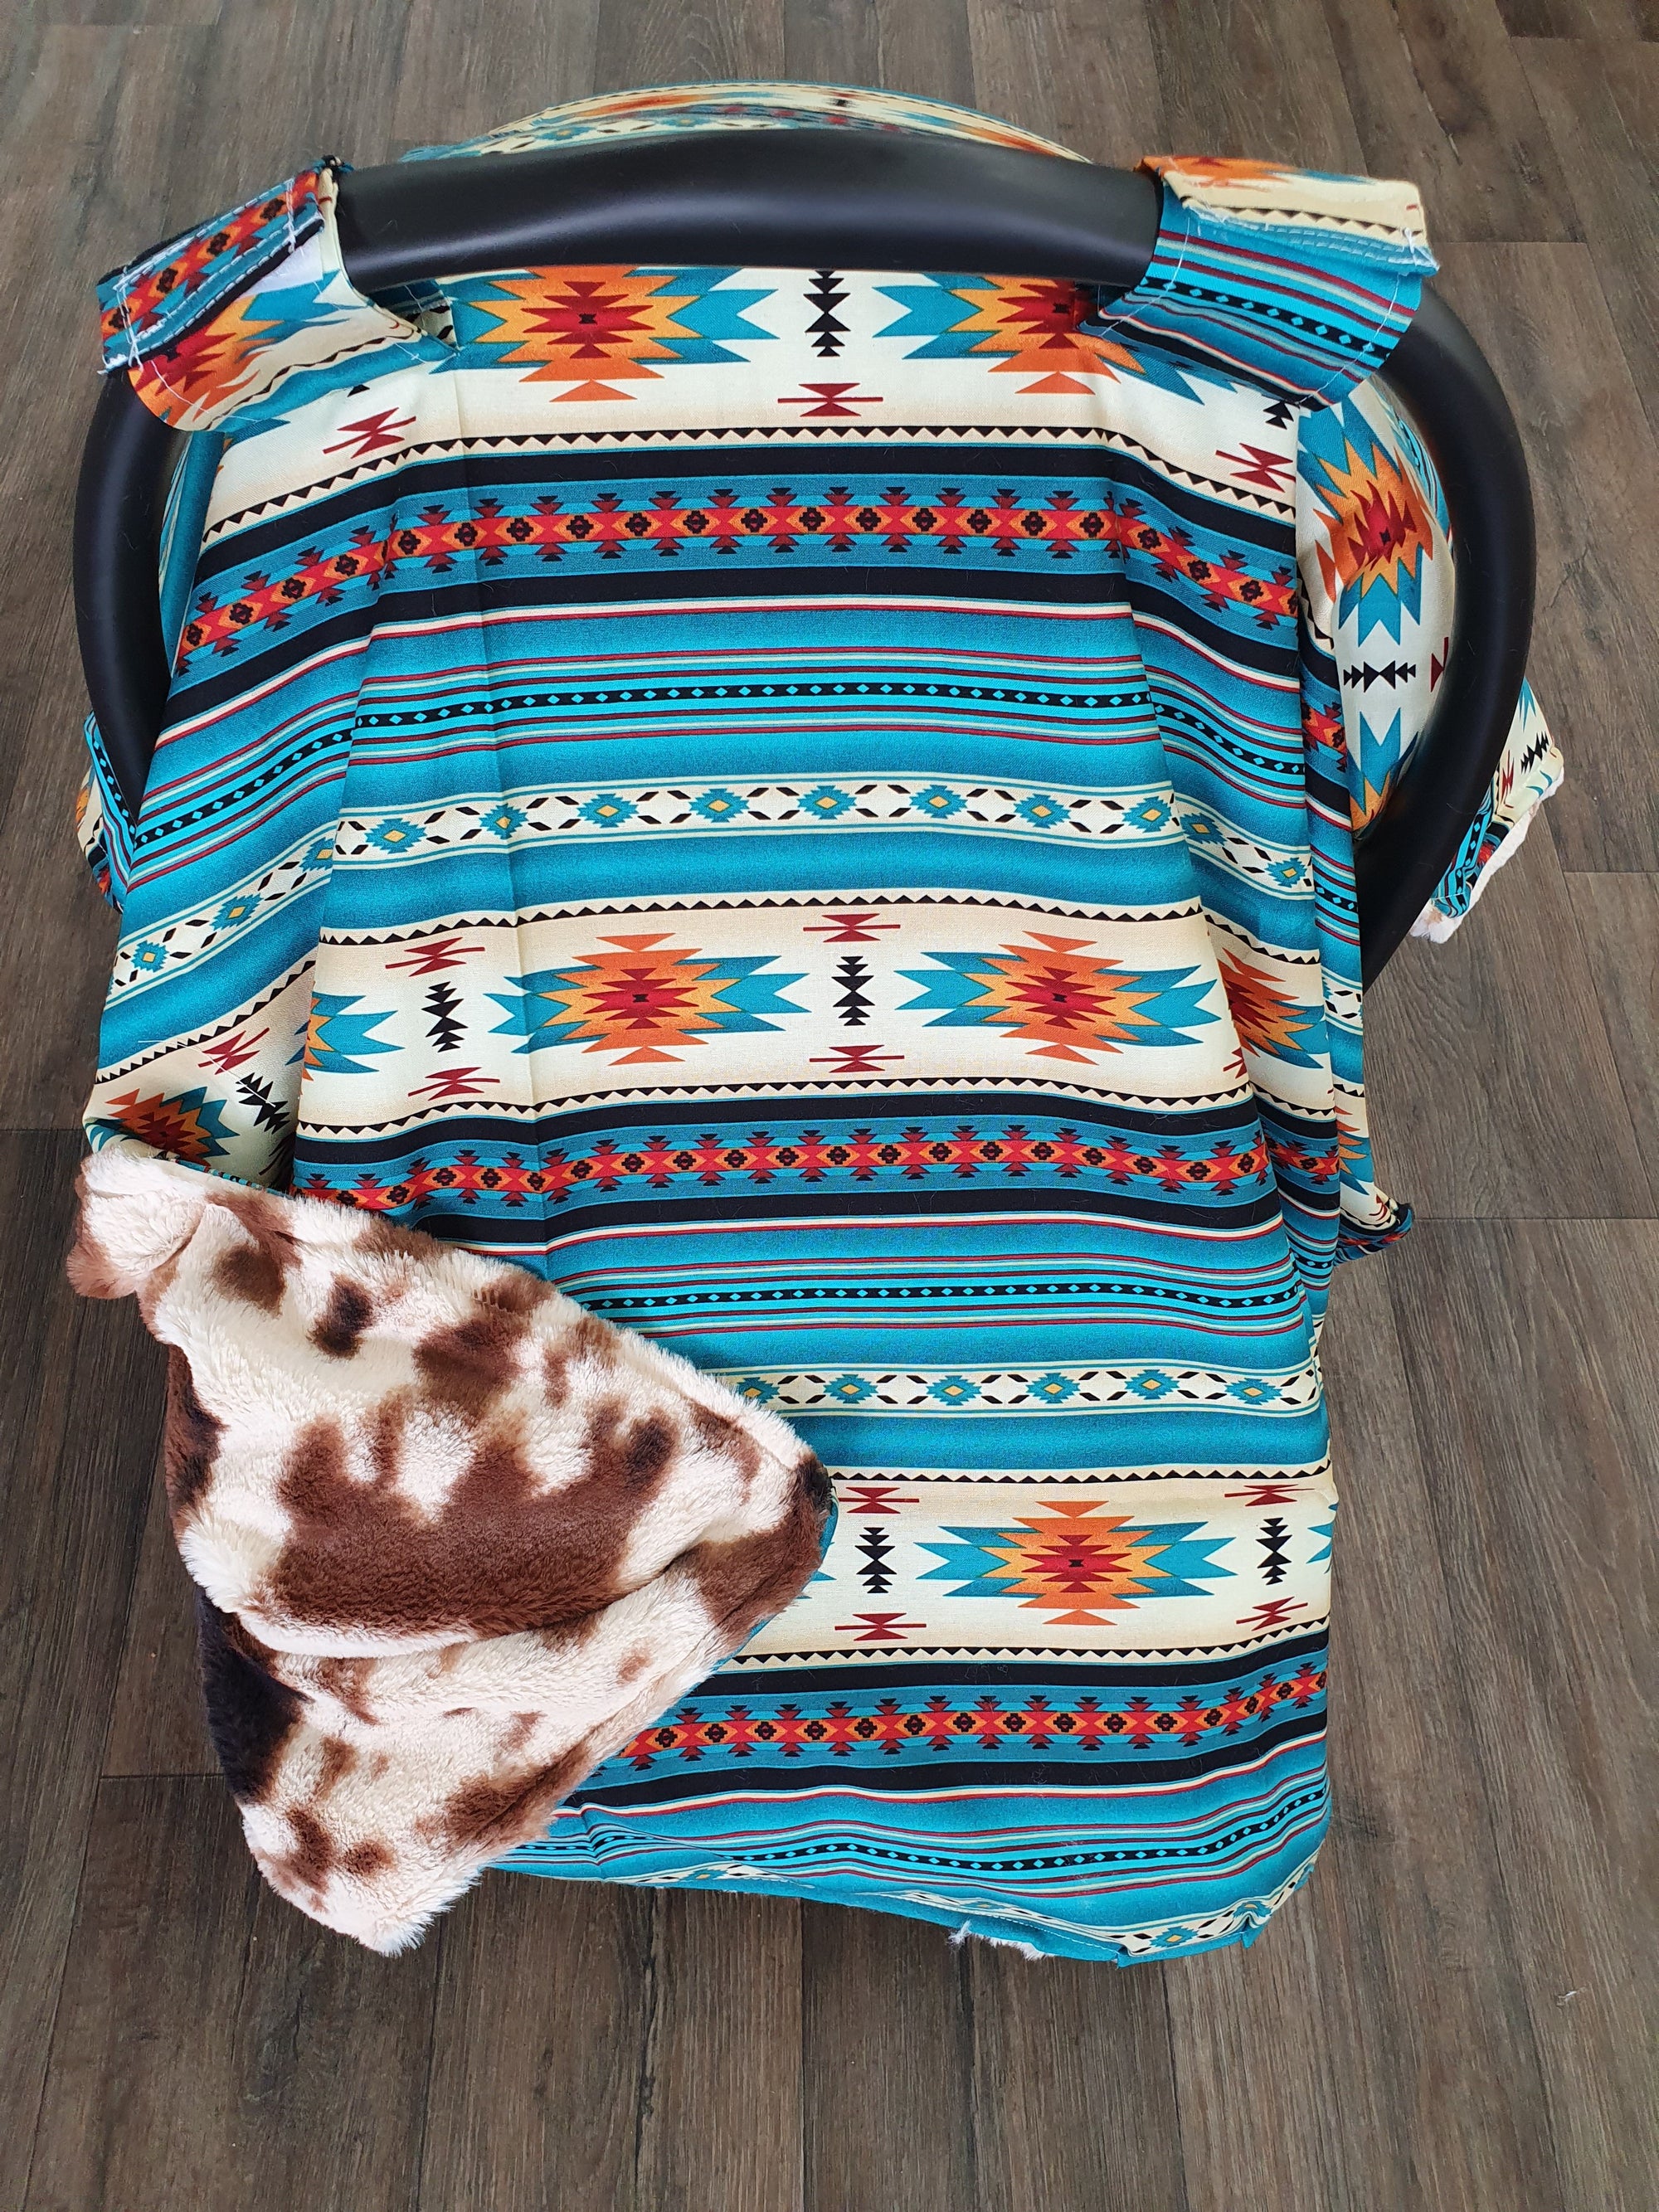 Carseat Tent - Aztec in Teal - DBC Baby Bedding Co 